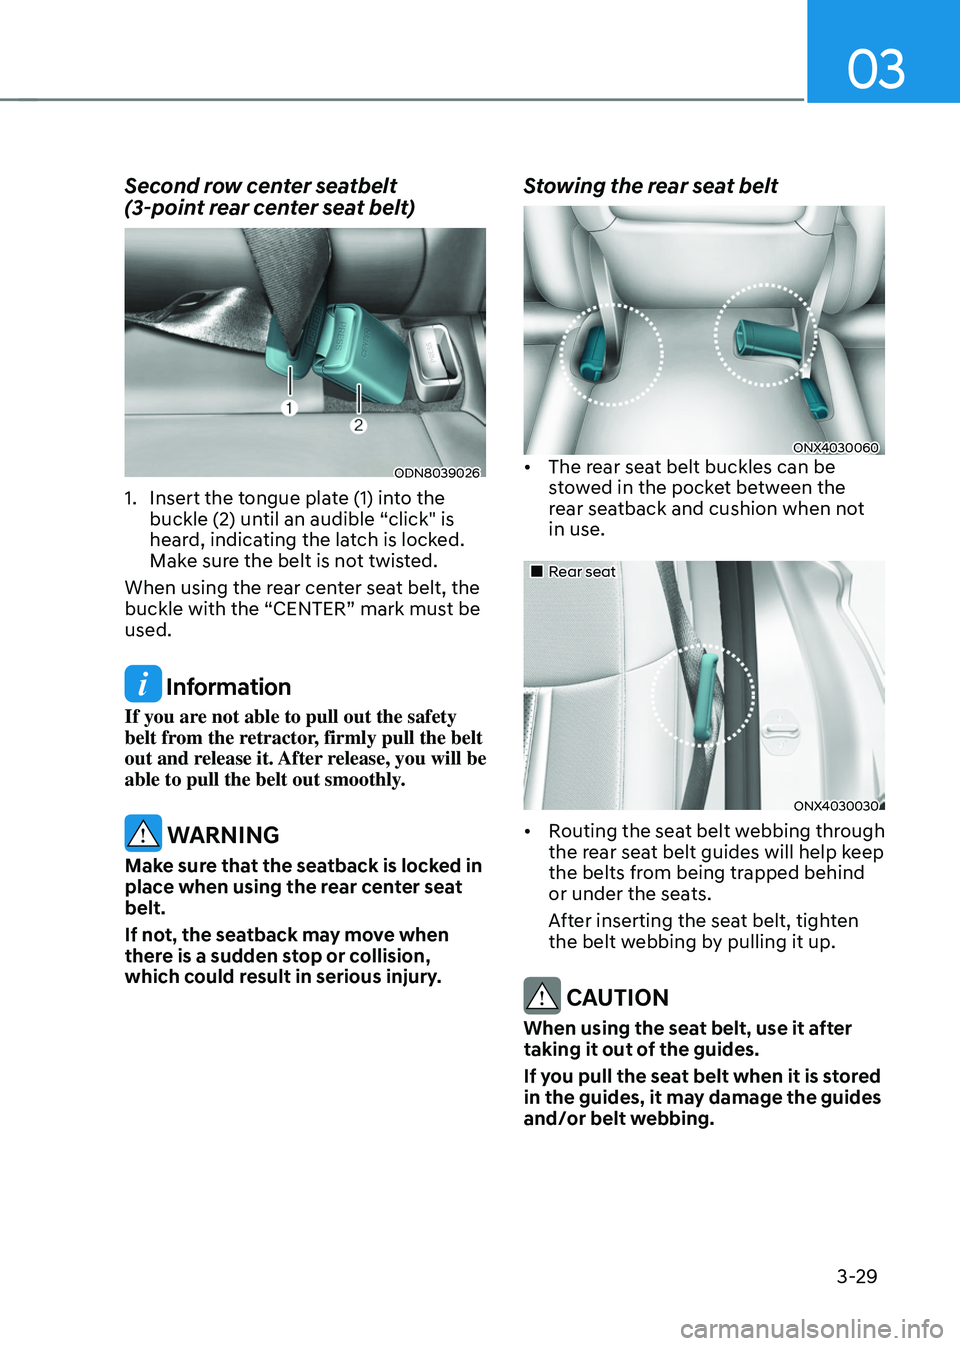 HYUNDAI TUCSON 2022  Owners Manual 03
3-29
Second row center seatbelt  
(3-point rear center seat belt)
ODN8039026
1. Insert the tongue plate (1) into the 
buckle (2) until an audible “click" is 
heard, indicating the latch is lo